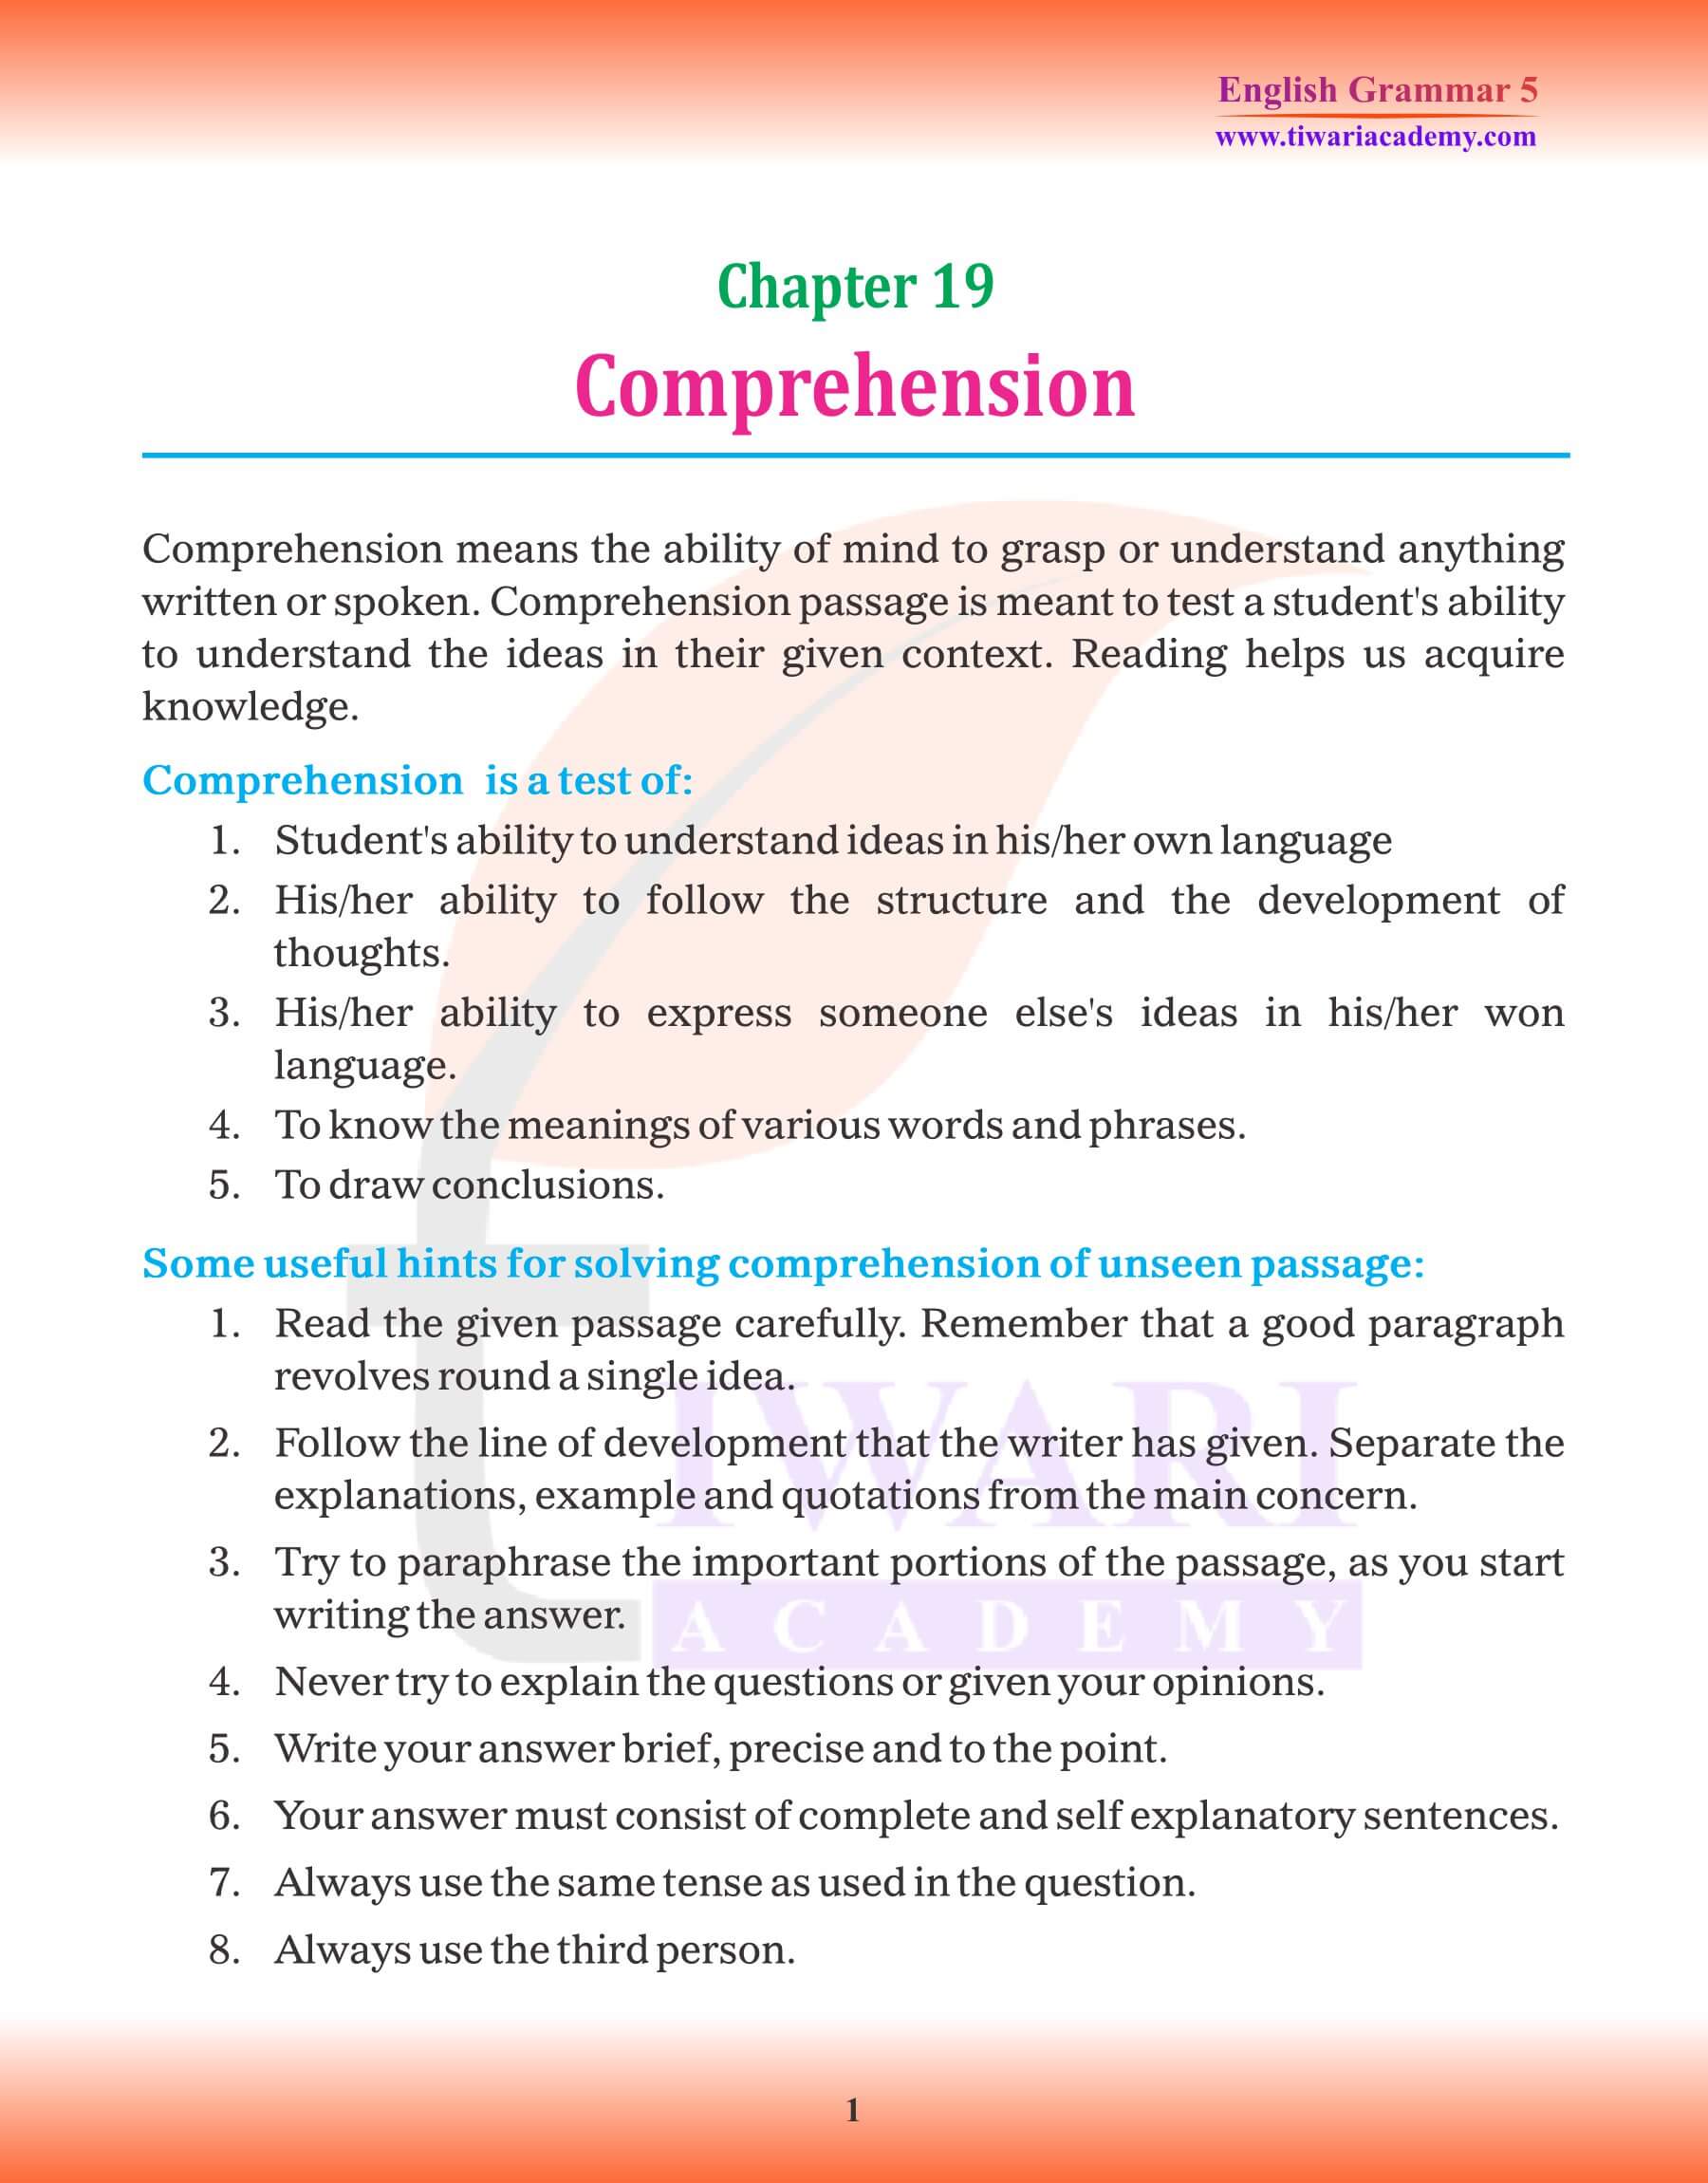 Class 5 English Grammar Chapter 19 Comprehension Rules